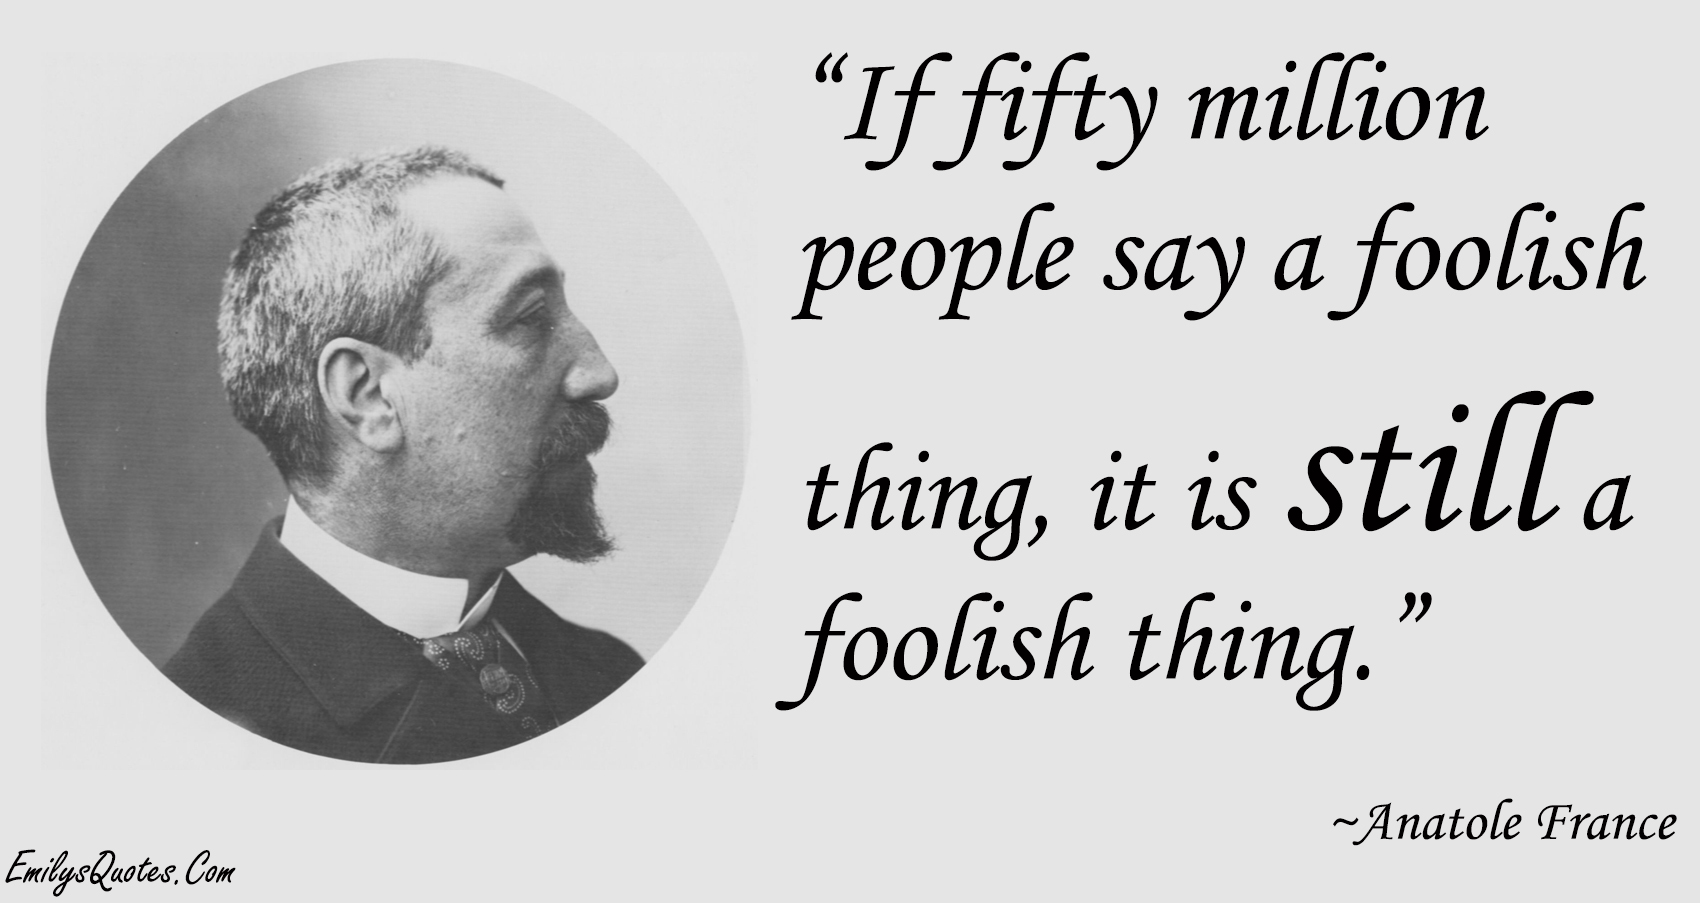 If fifty million people say a foolish thing, it is still a foolish thing